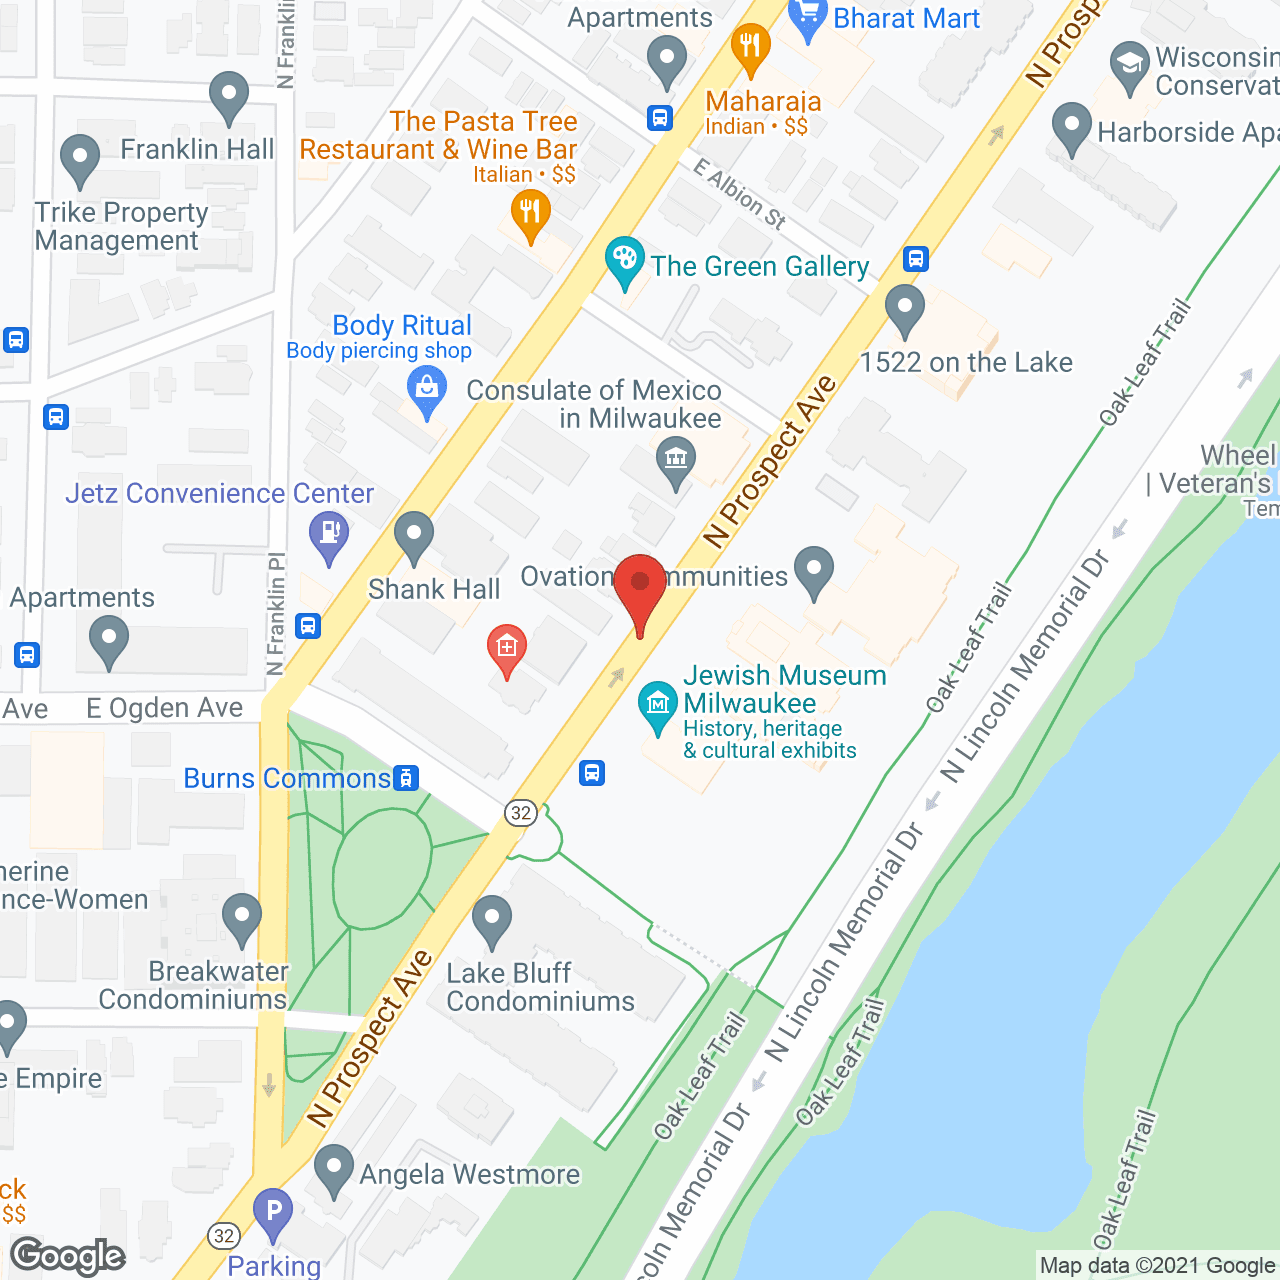 Jewish Home & Care Ctr in google map